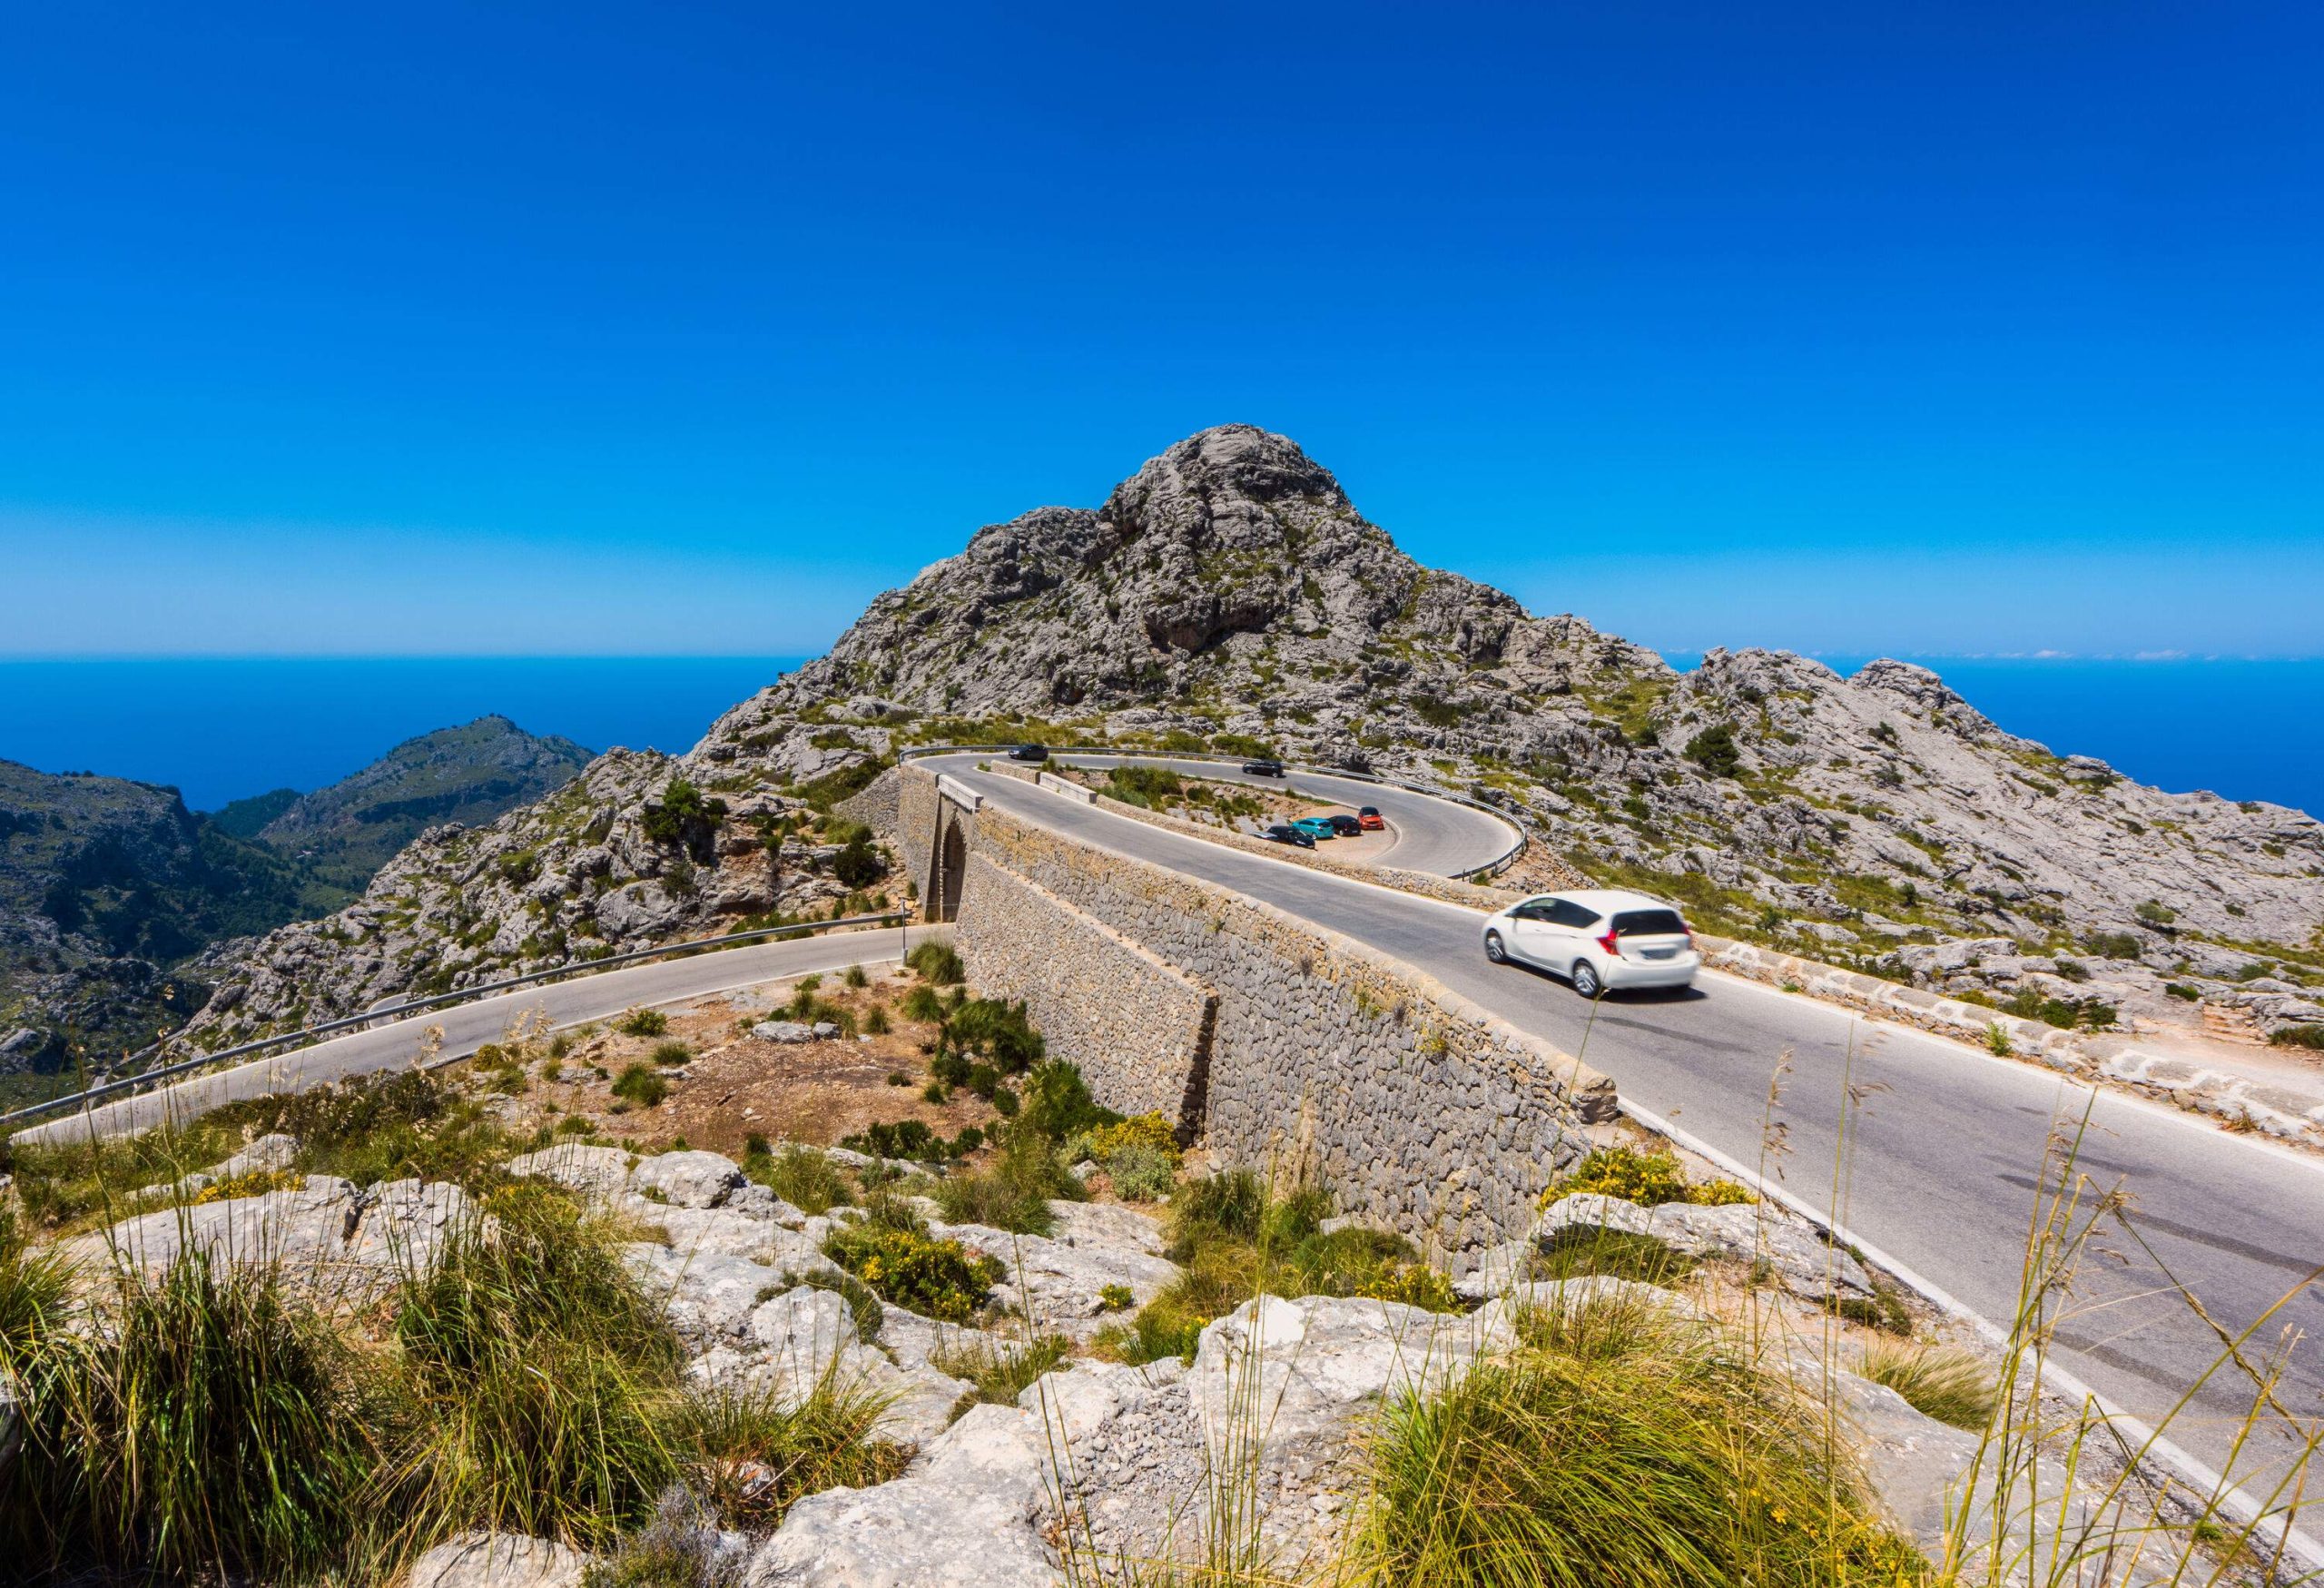 Vehicles travel the spiral bridge road in the rocky mountain overlooking the sea against the blue sky.